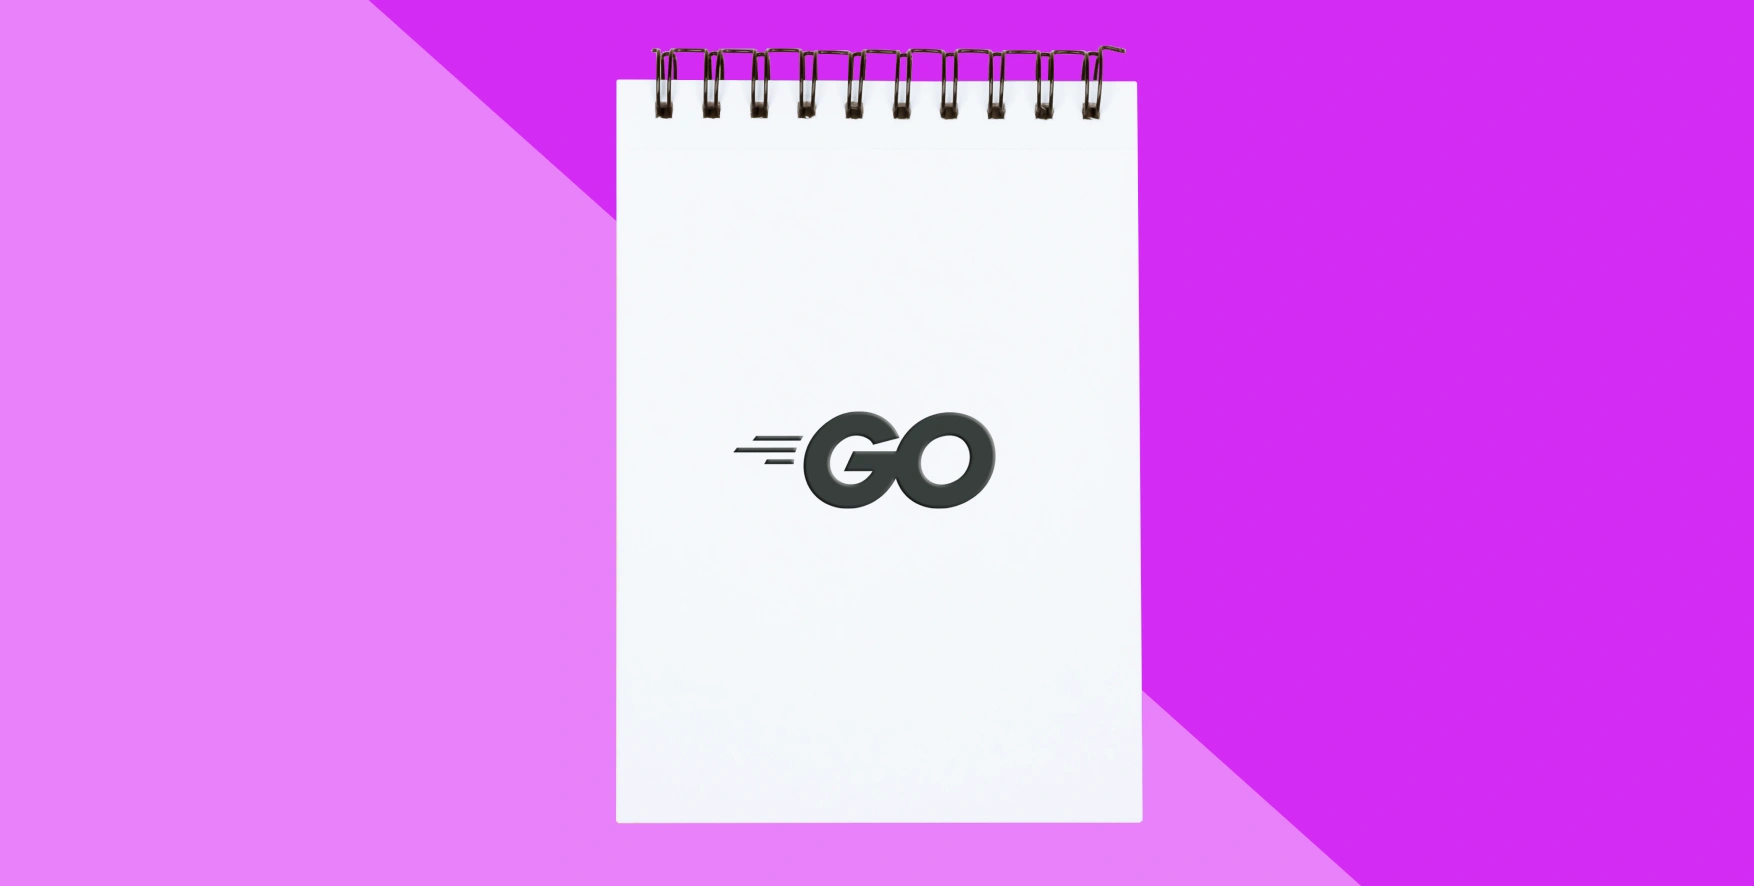 Go symbol on a piece of notepad